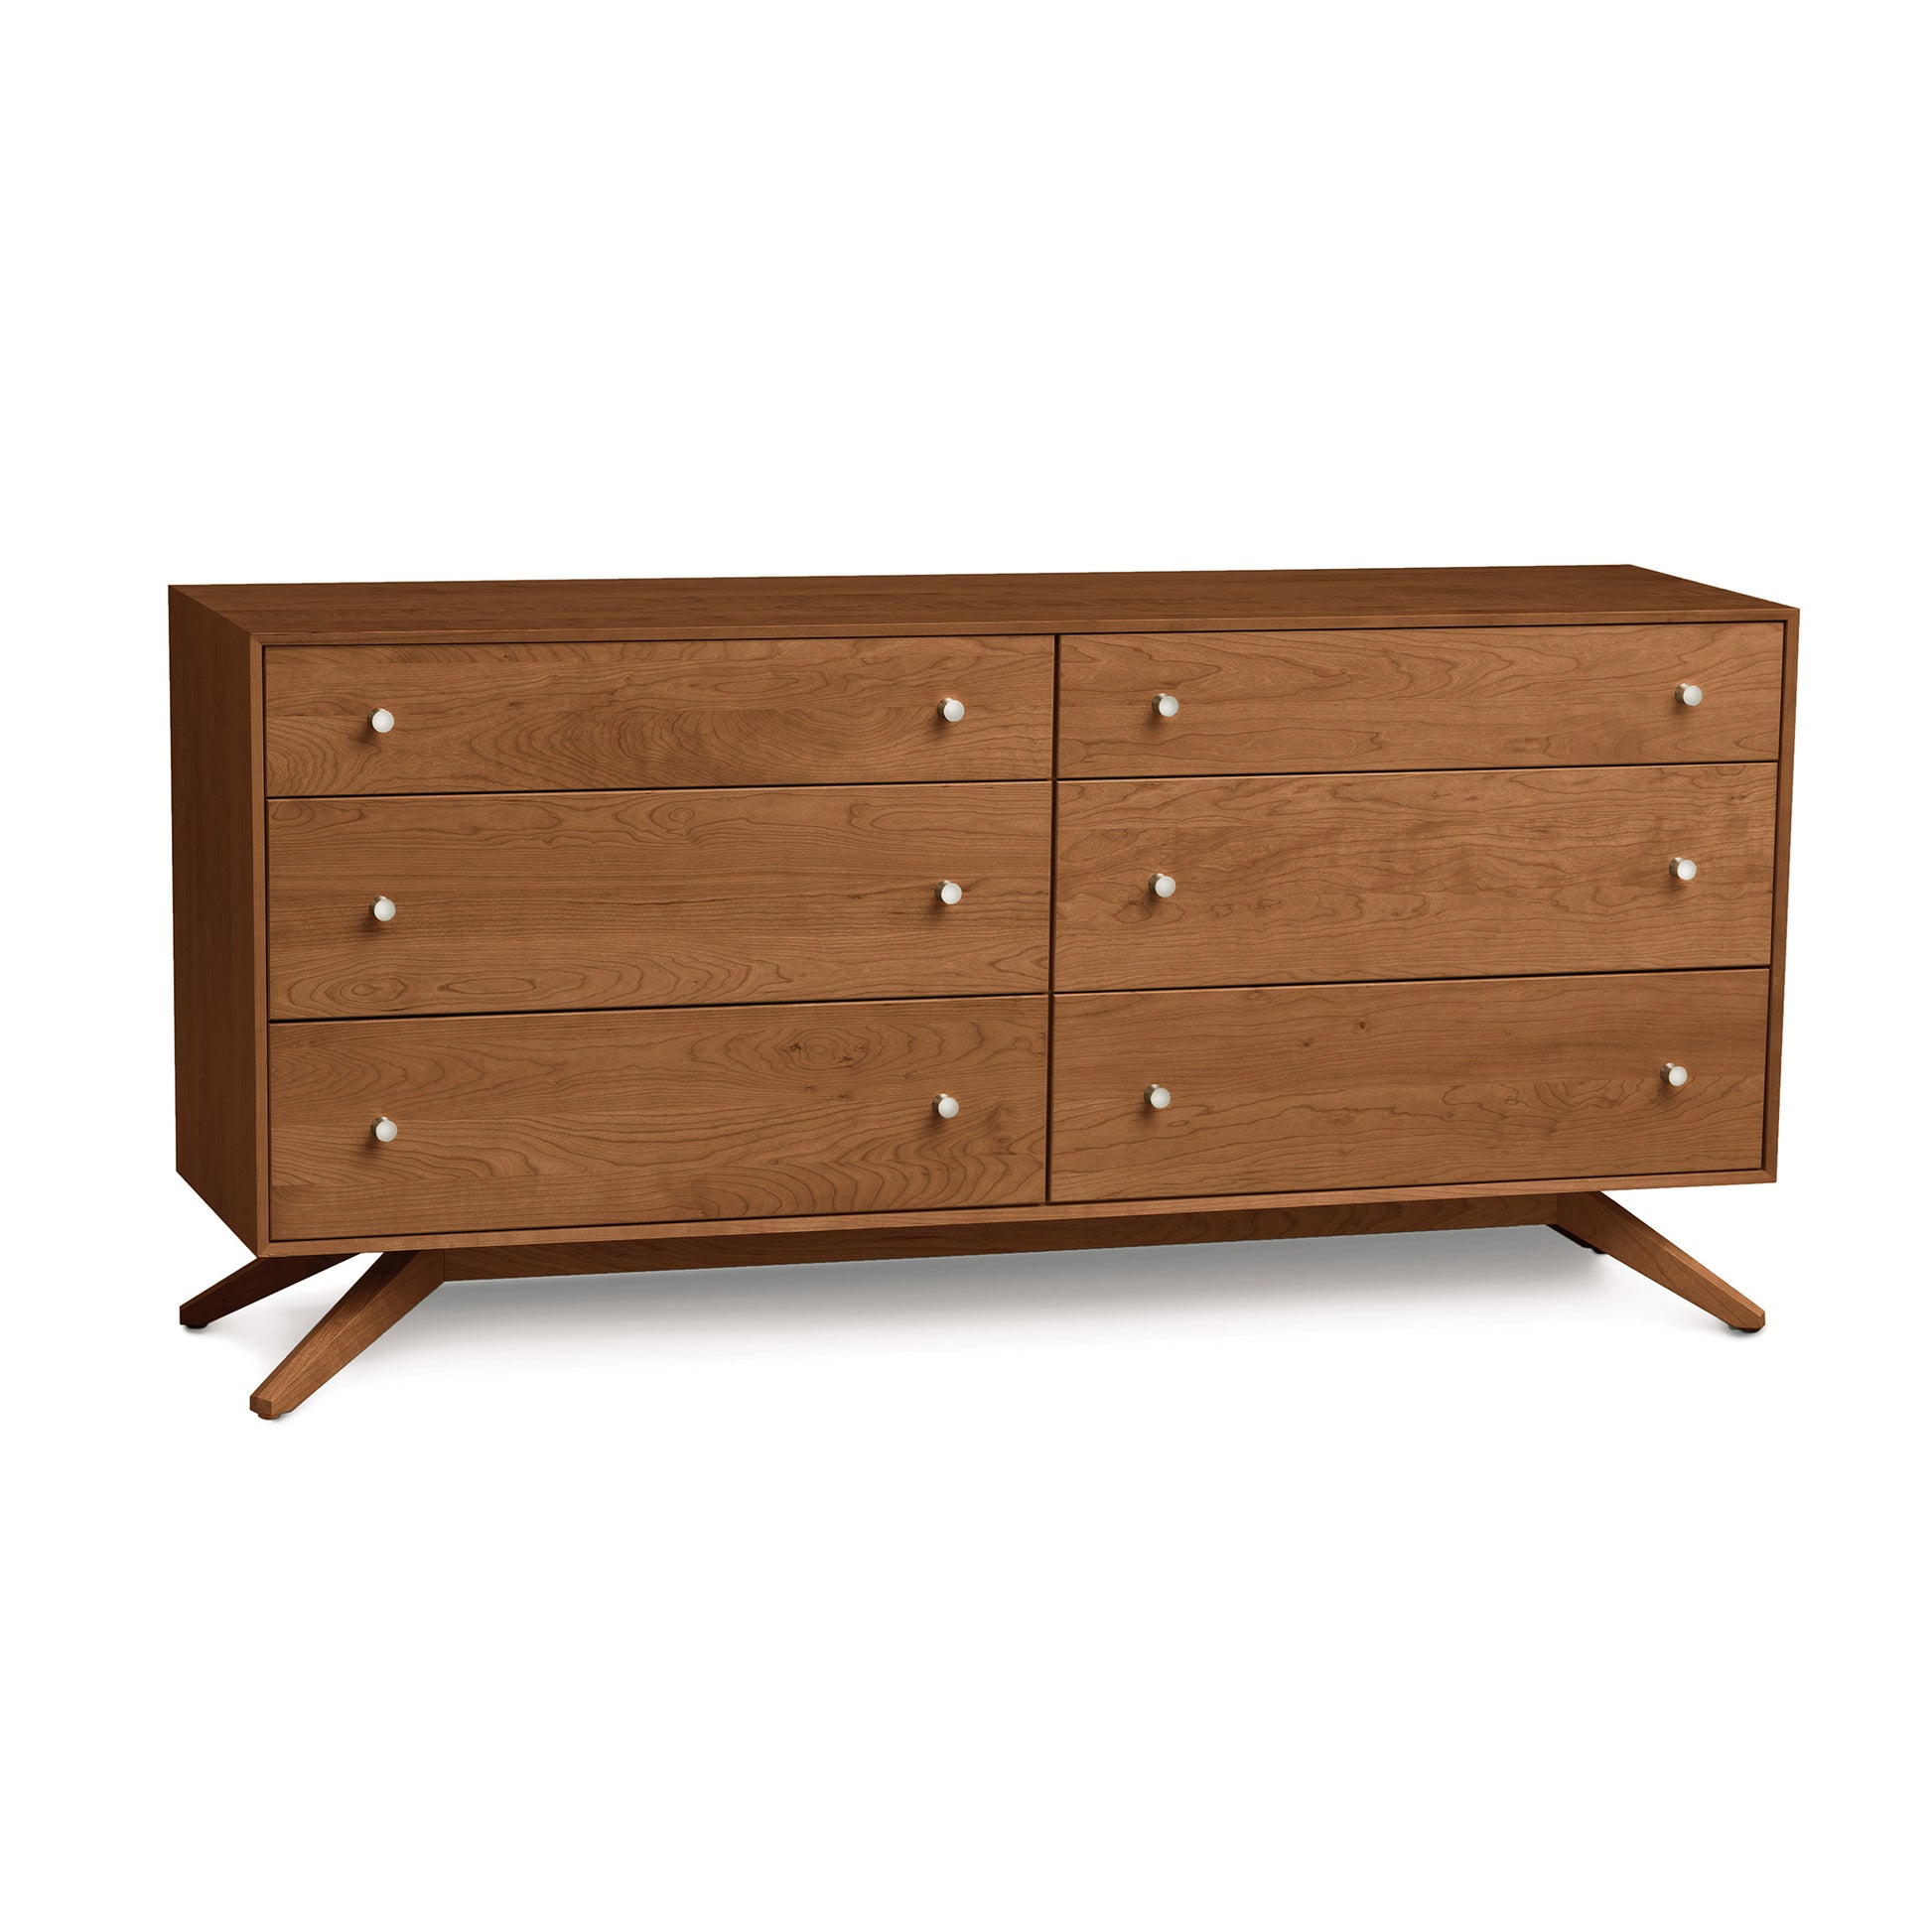 A Copeland Furniture Astrid 6-Drawer Dresser with angled legs and round knobs on a white background.